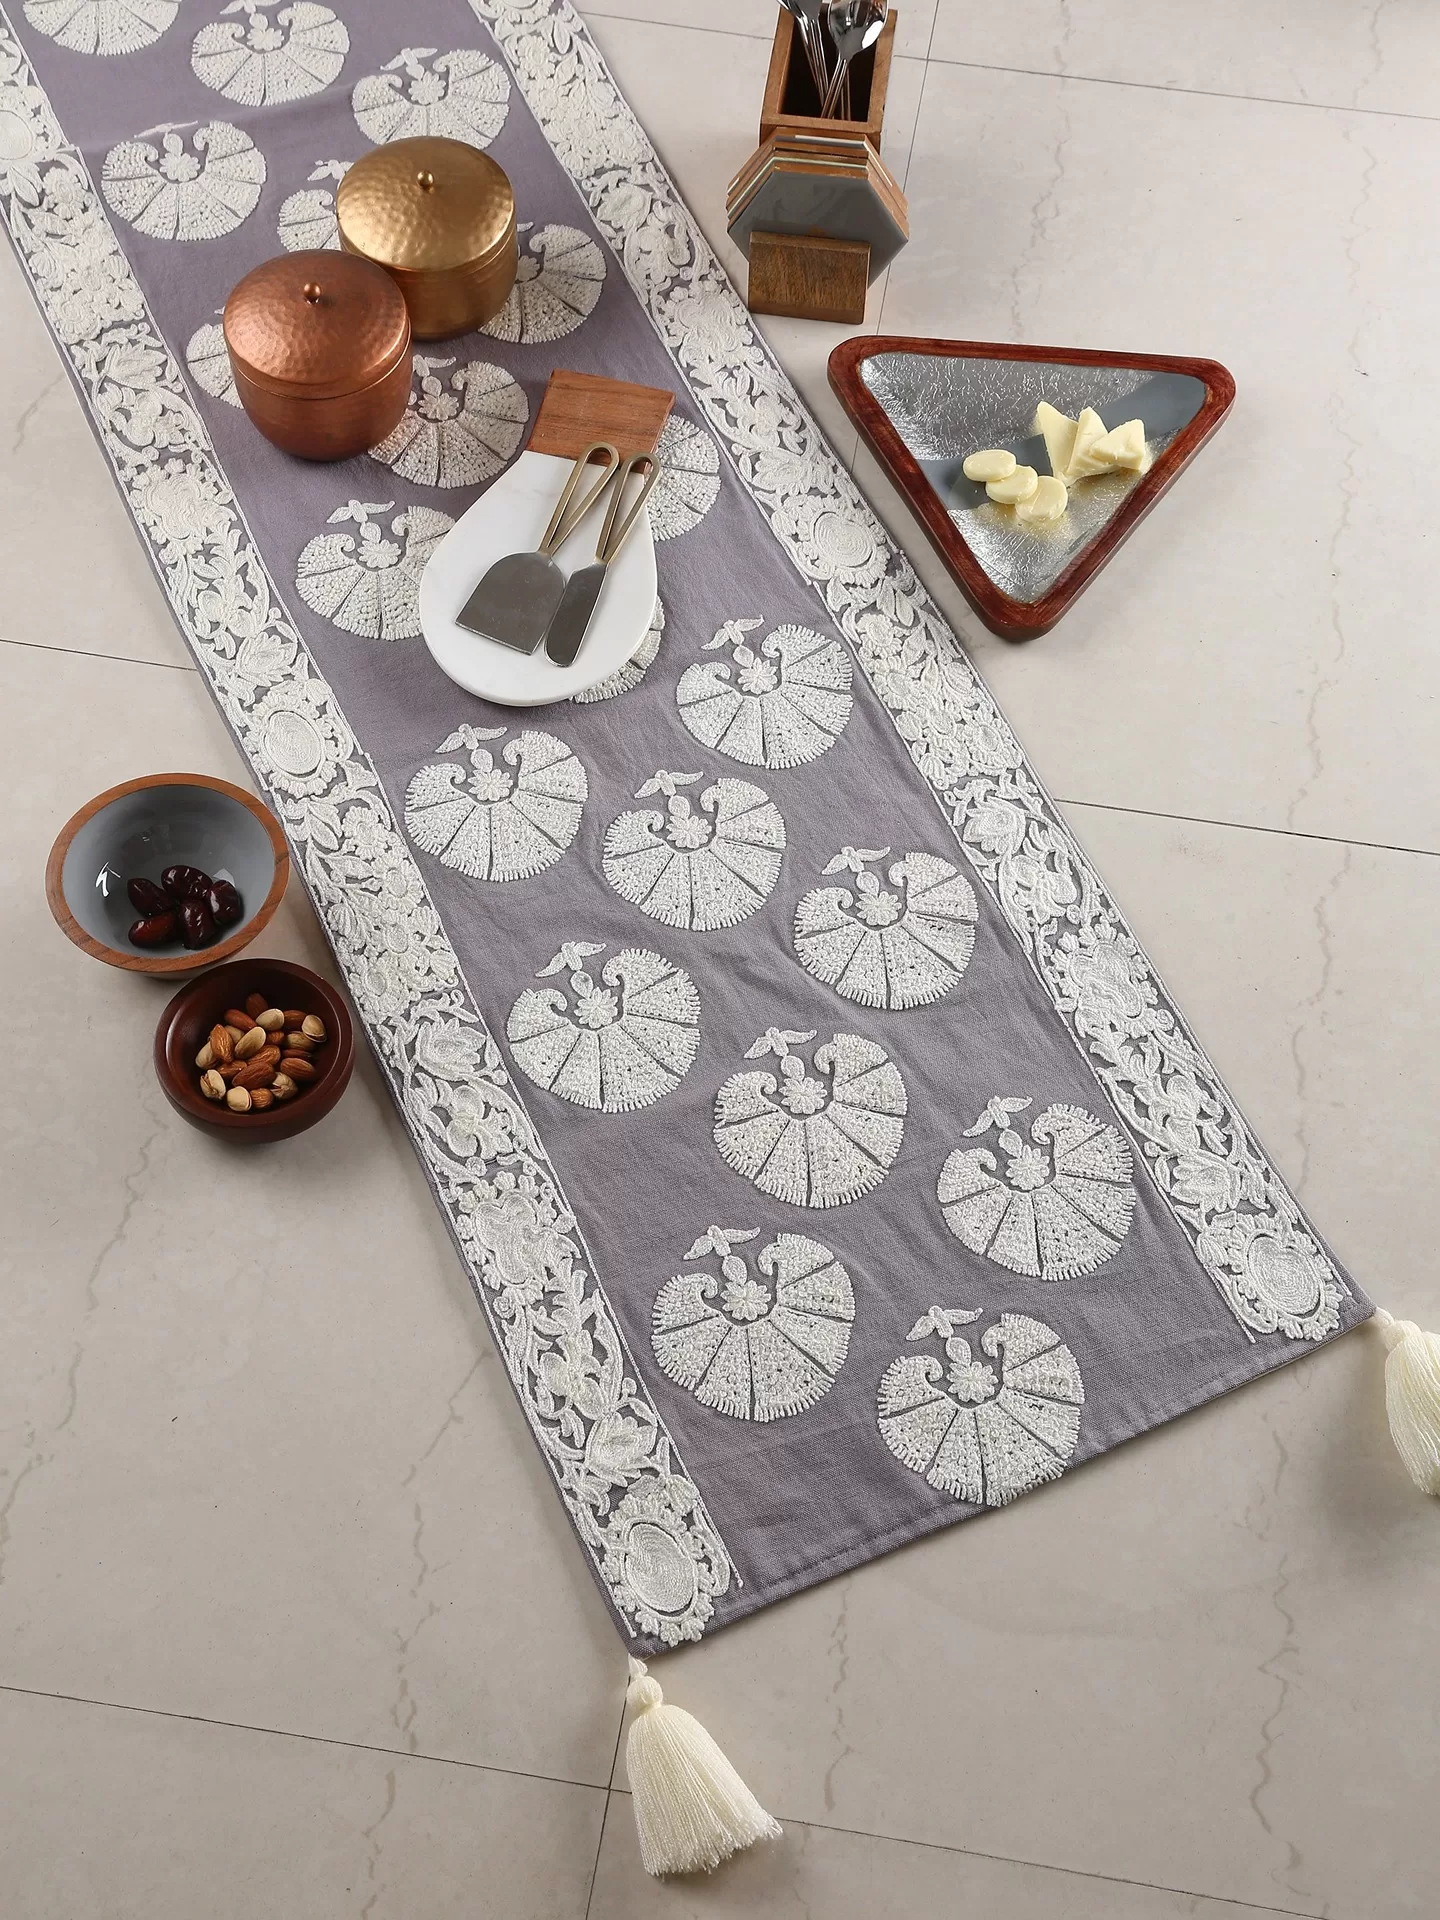 Moghul design table runner with grey embroidery - Amoliconcepts